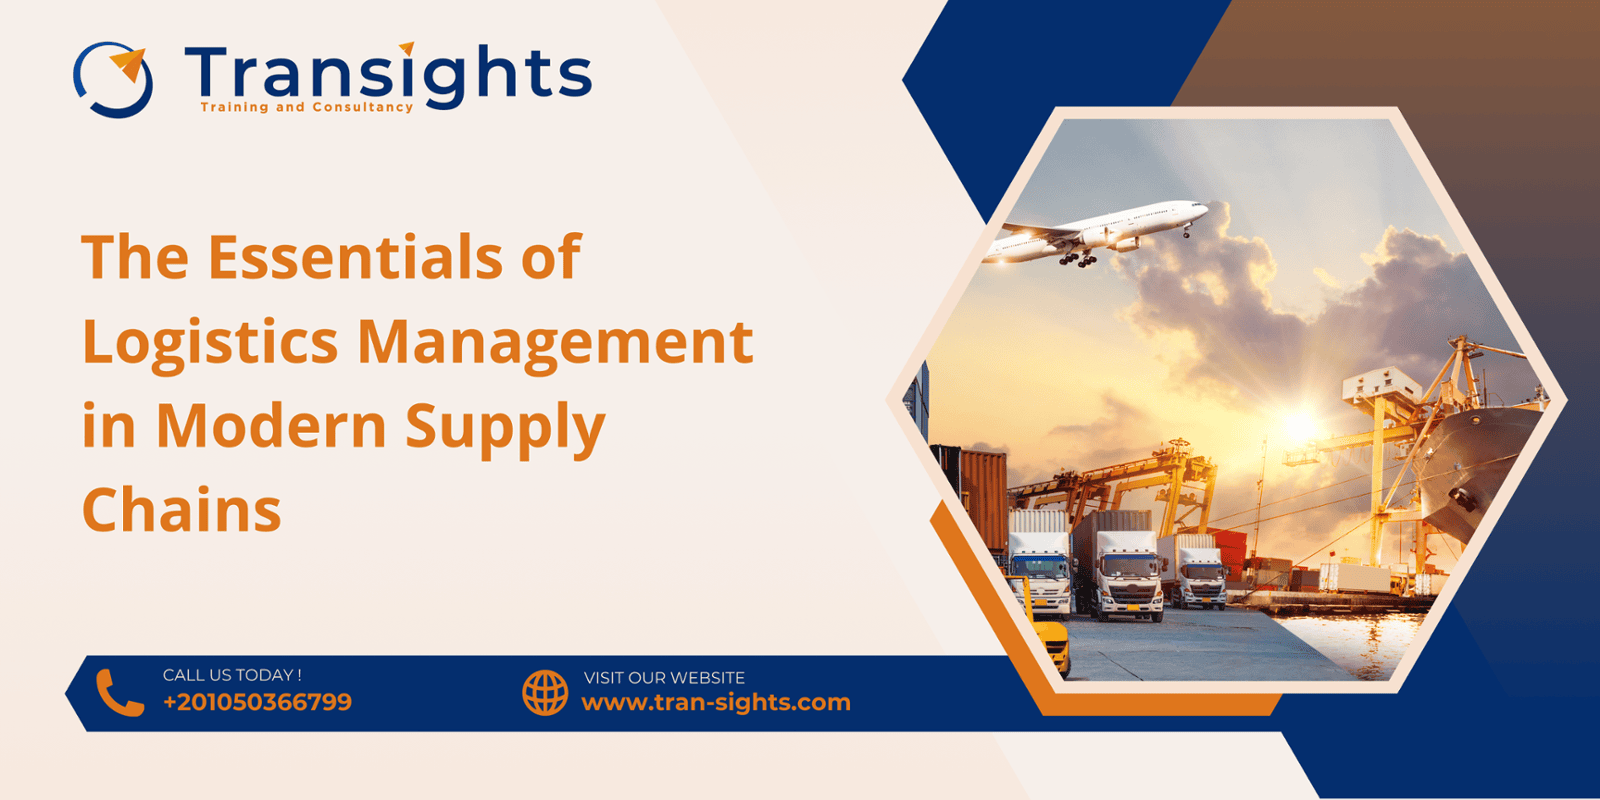 The Essentials of Logistics Management in Modern Supply Chains